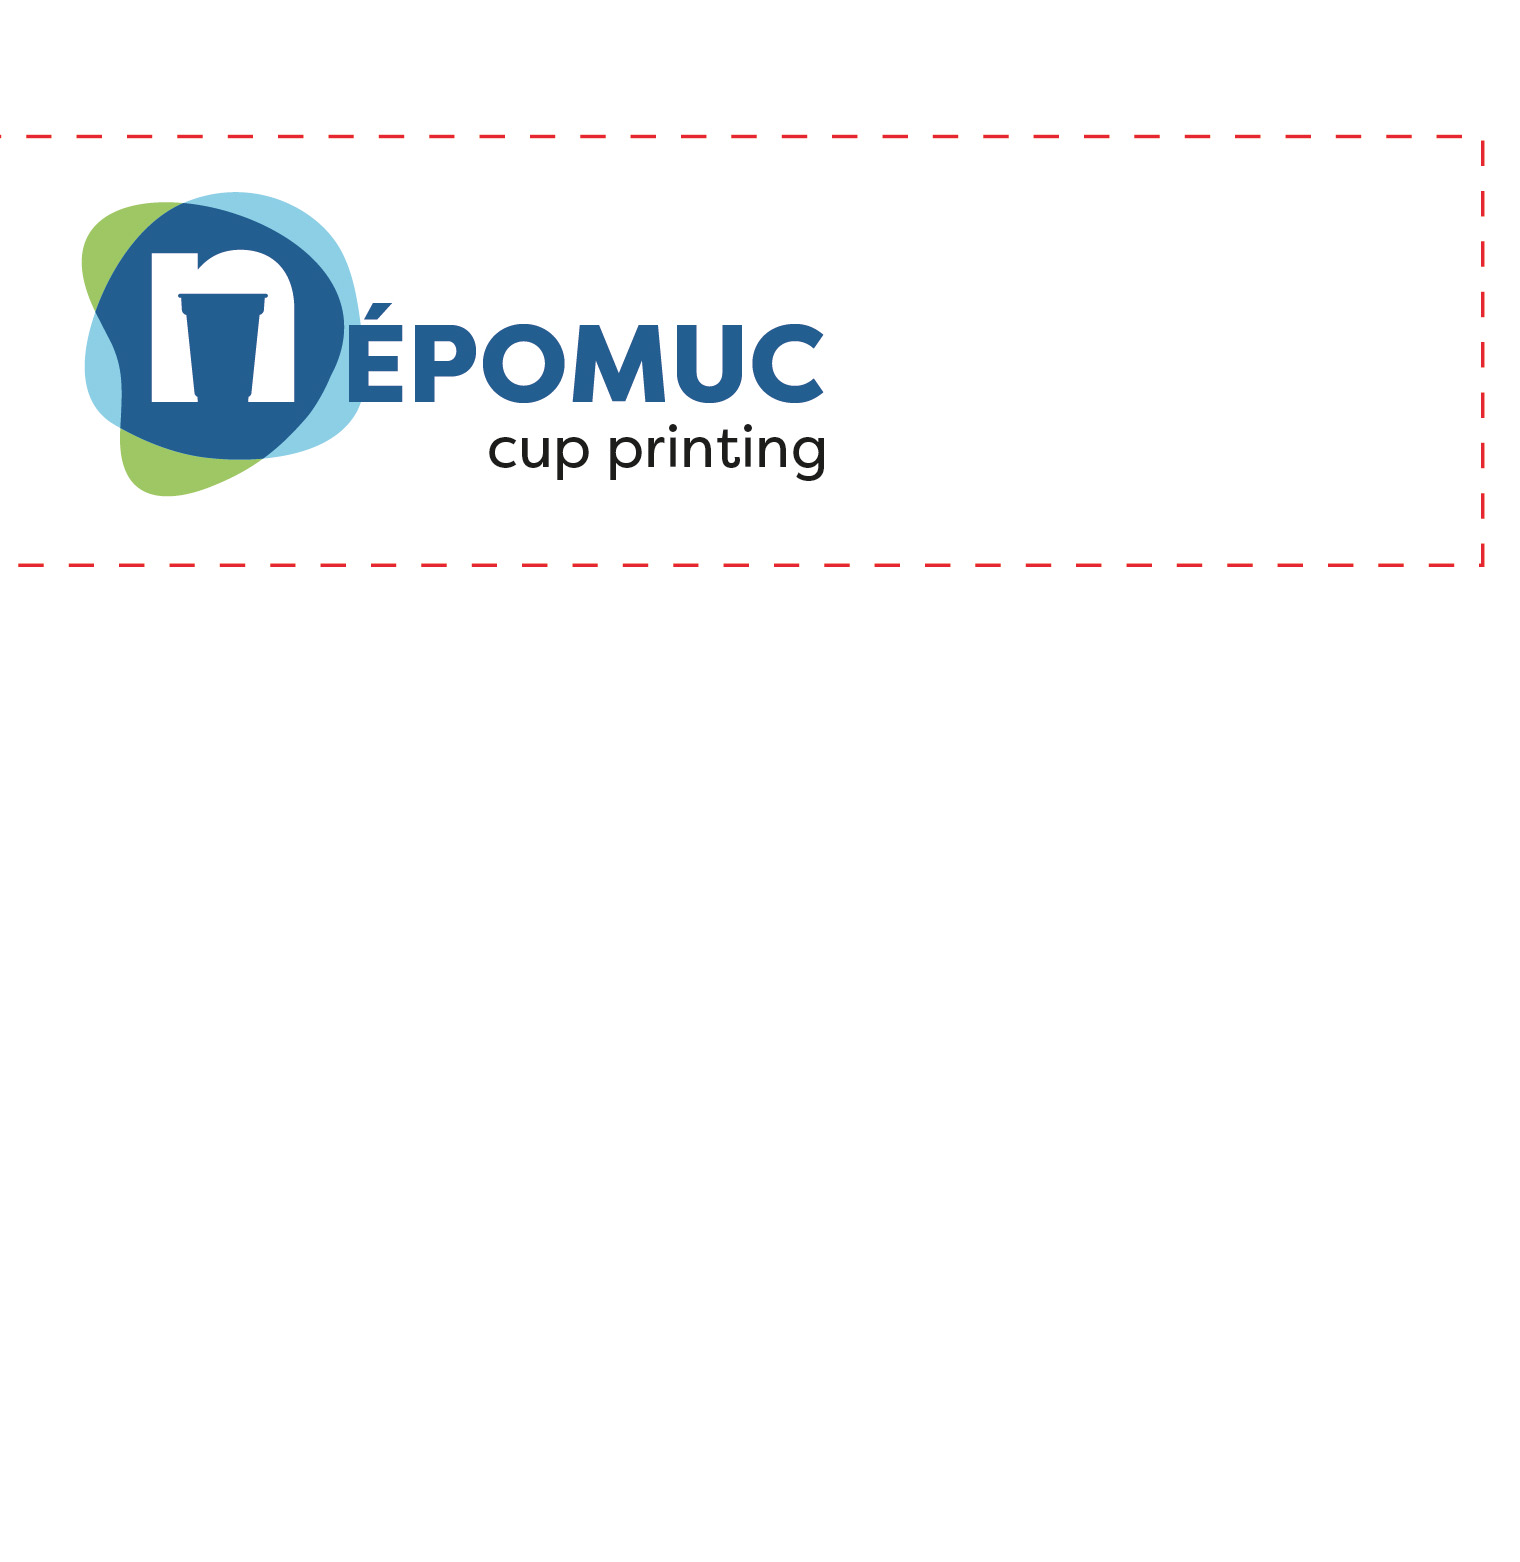 Mobitech Népomuc cup printing - Specialist in used industrial screenprinting and dry-offset printing machinery.